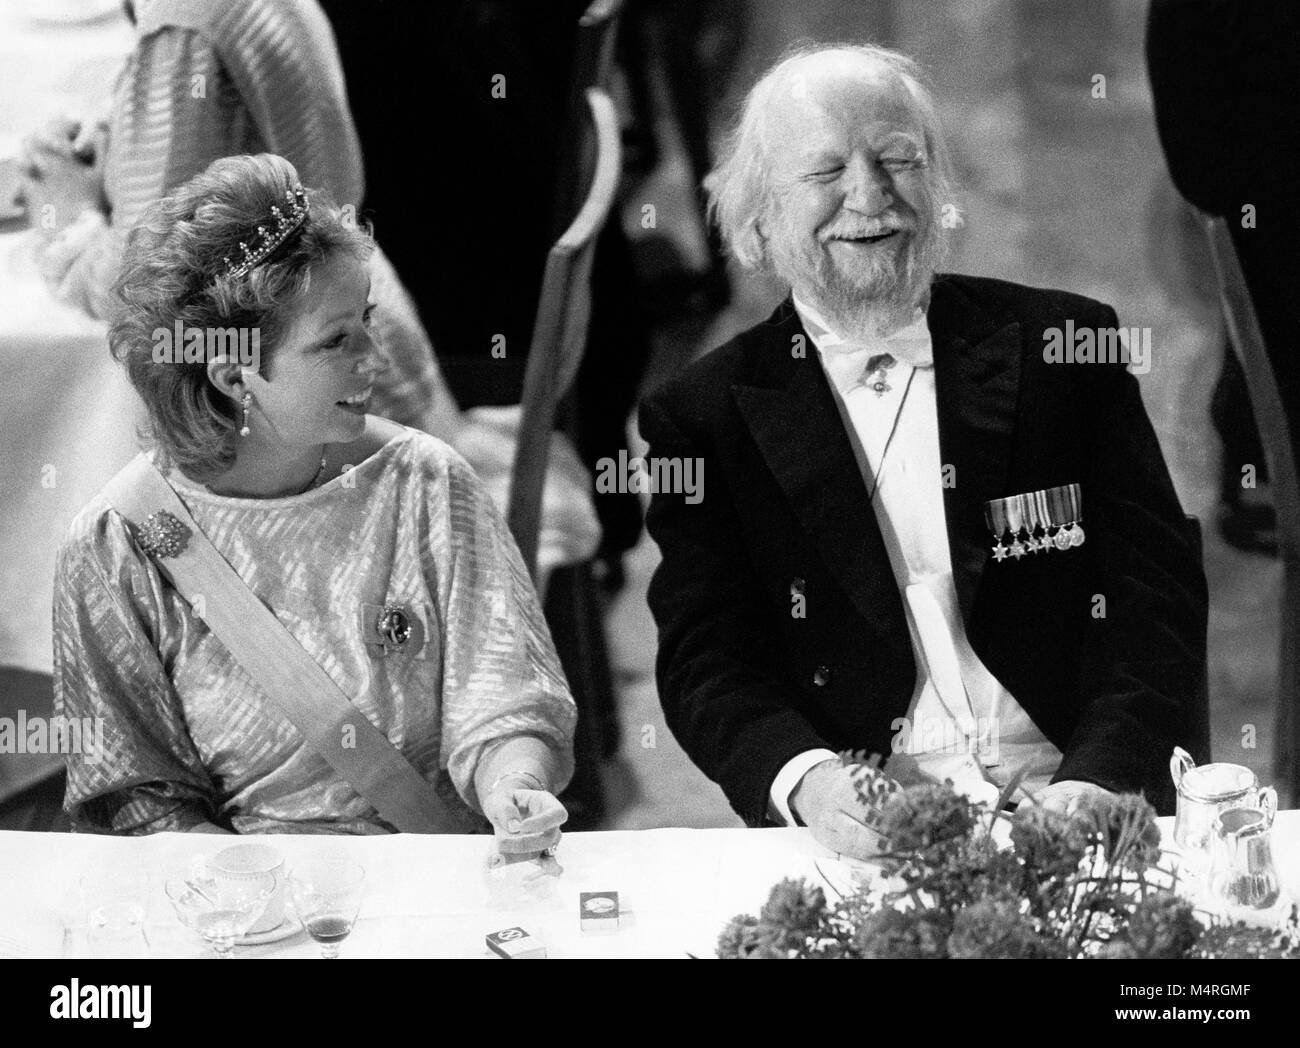 WILLIAM GOLDING British author and Nobel prize laureatet in literature at Nobel Banquete table with Princess Christina of Sweden 1983 Stock Photo